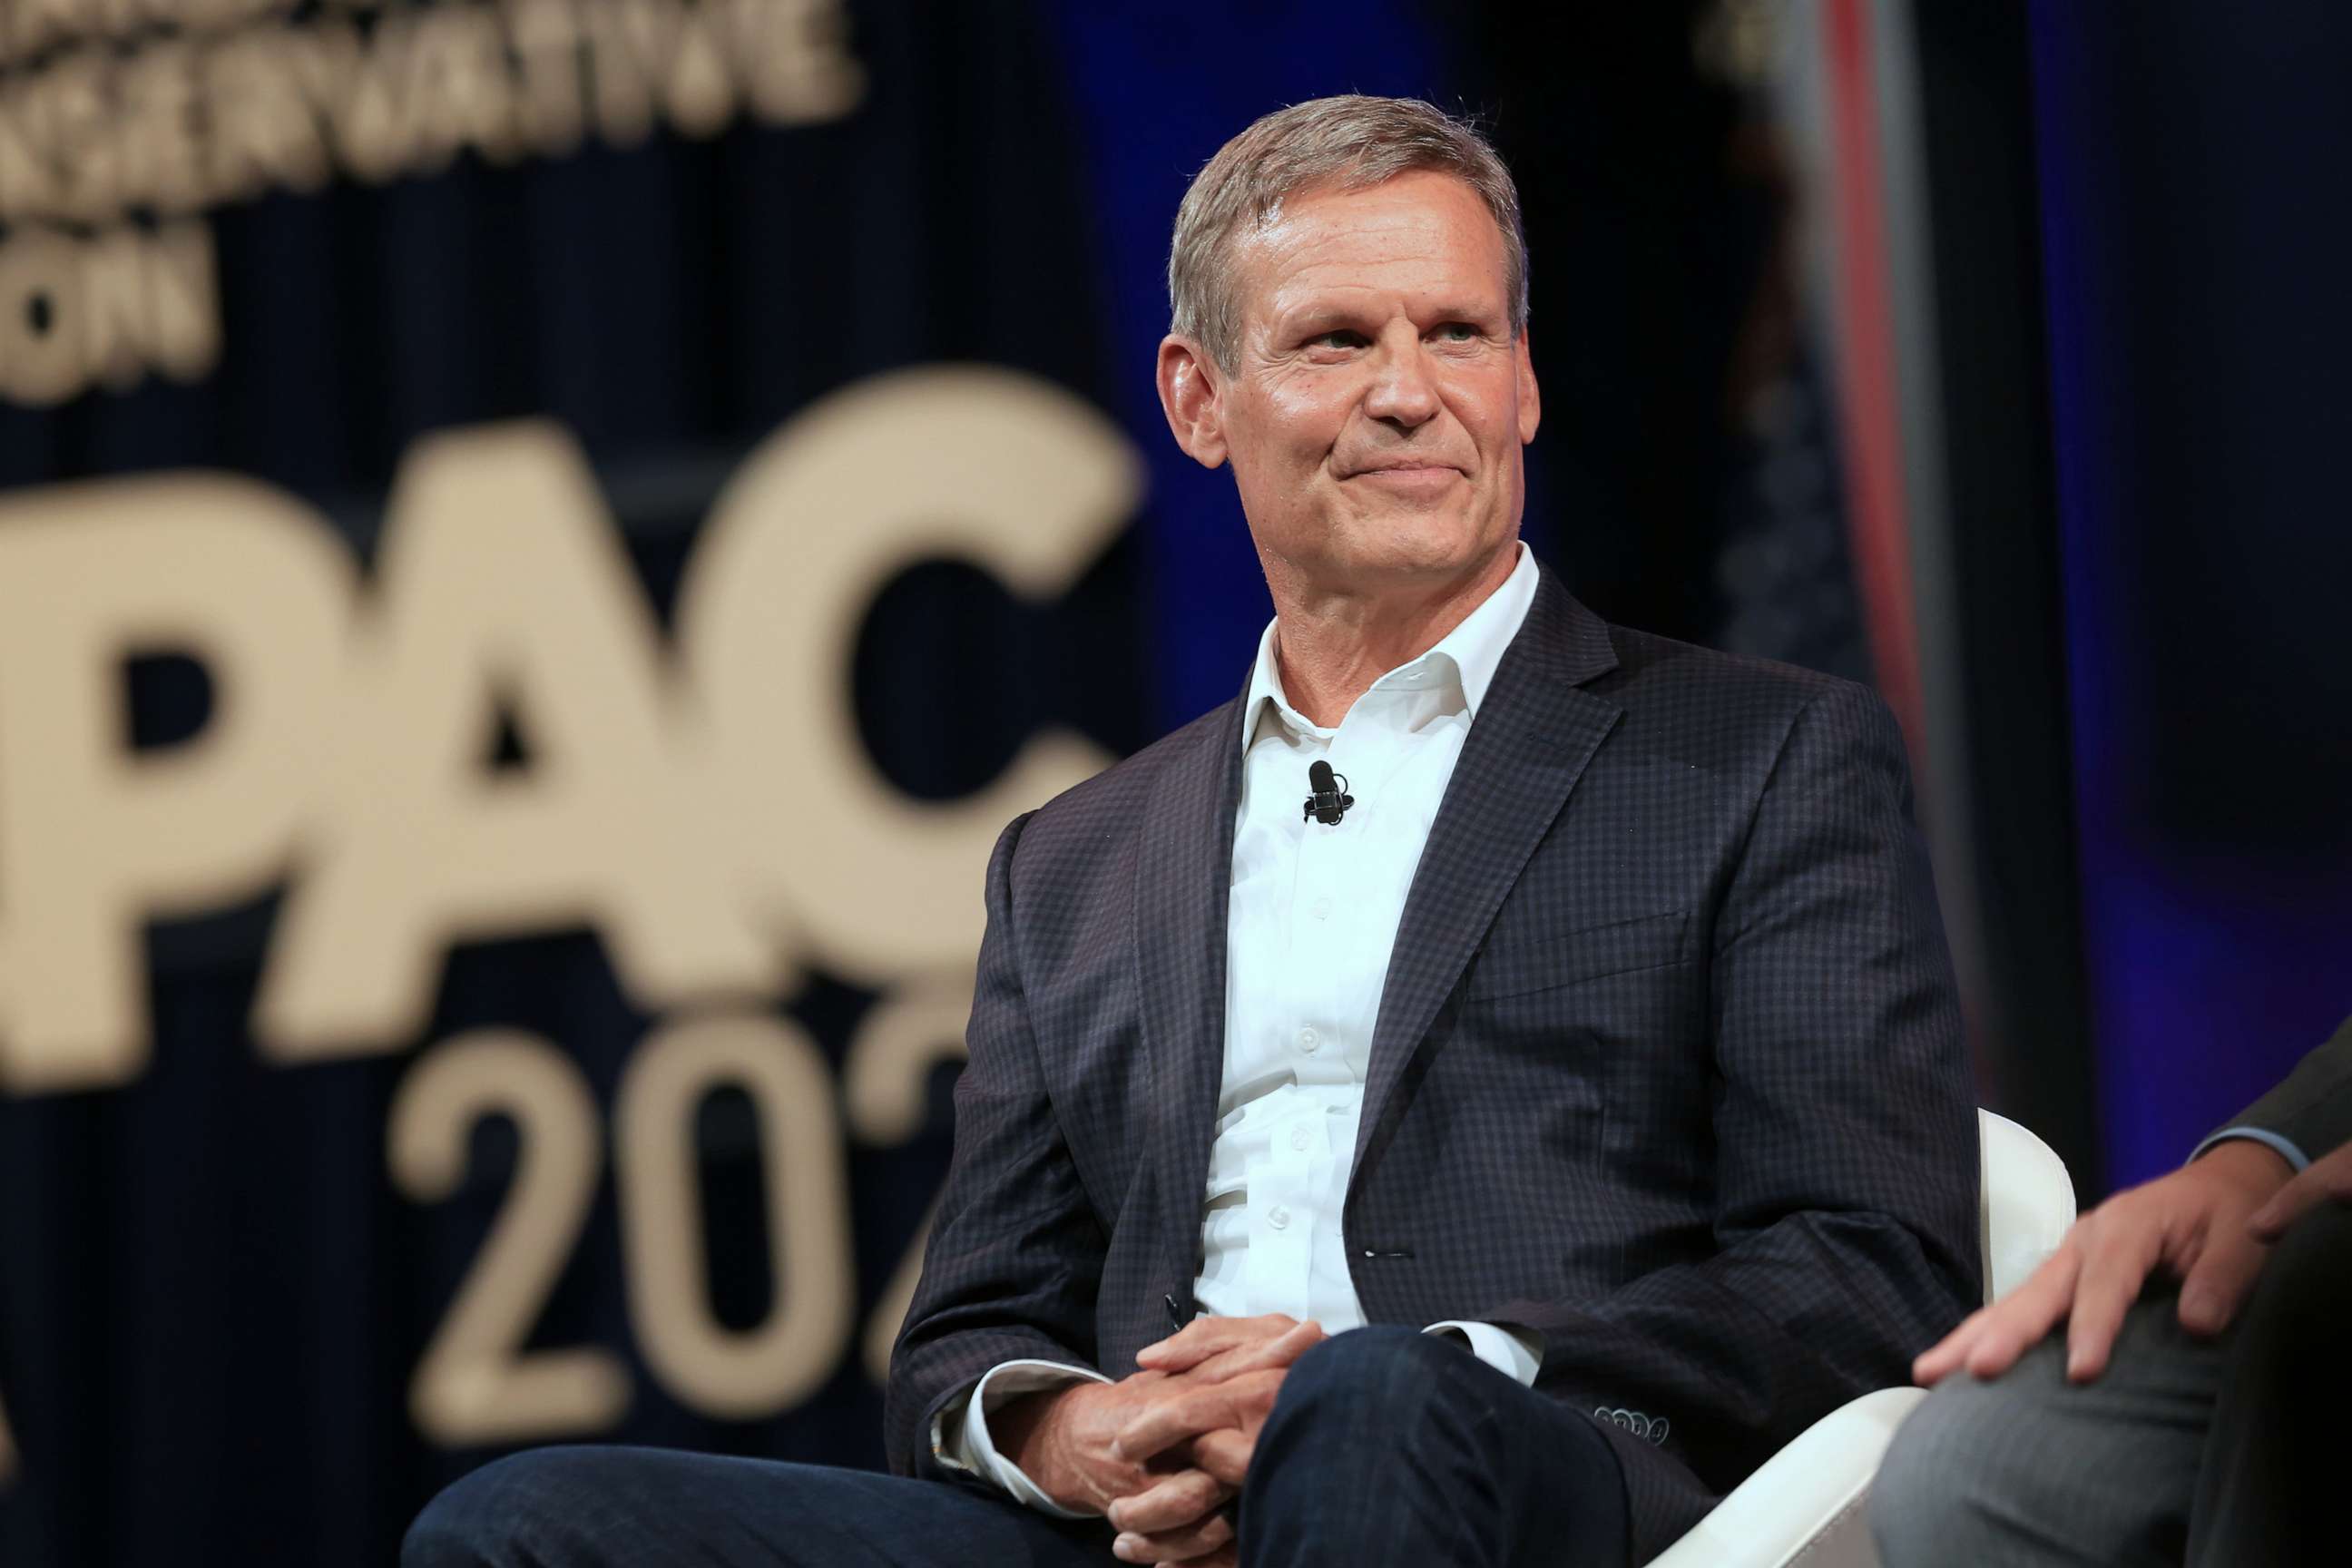 PHOTO: Bill Lee, governor of Tennessee, smiles during the Conservative Political Action Conference (CPAC) in Dallas, July 10, 2021.